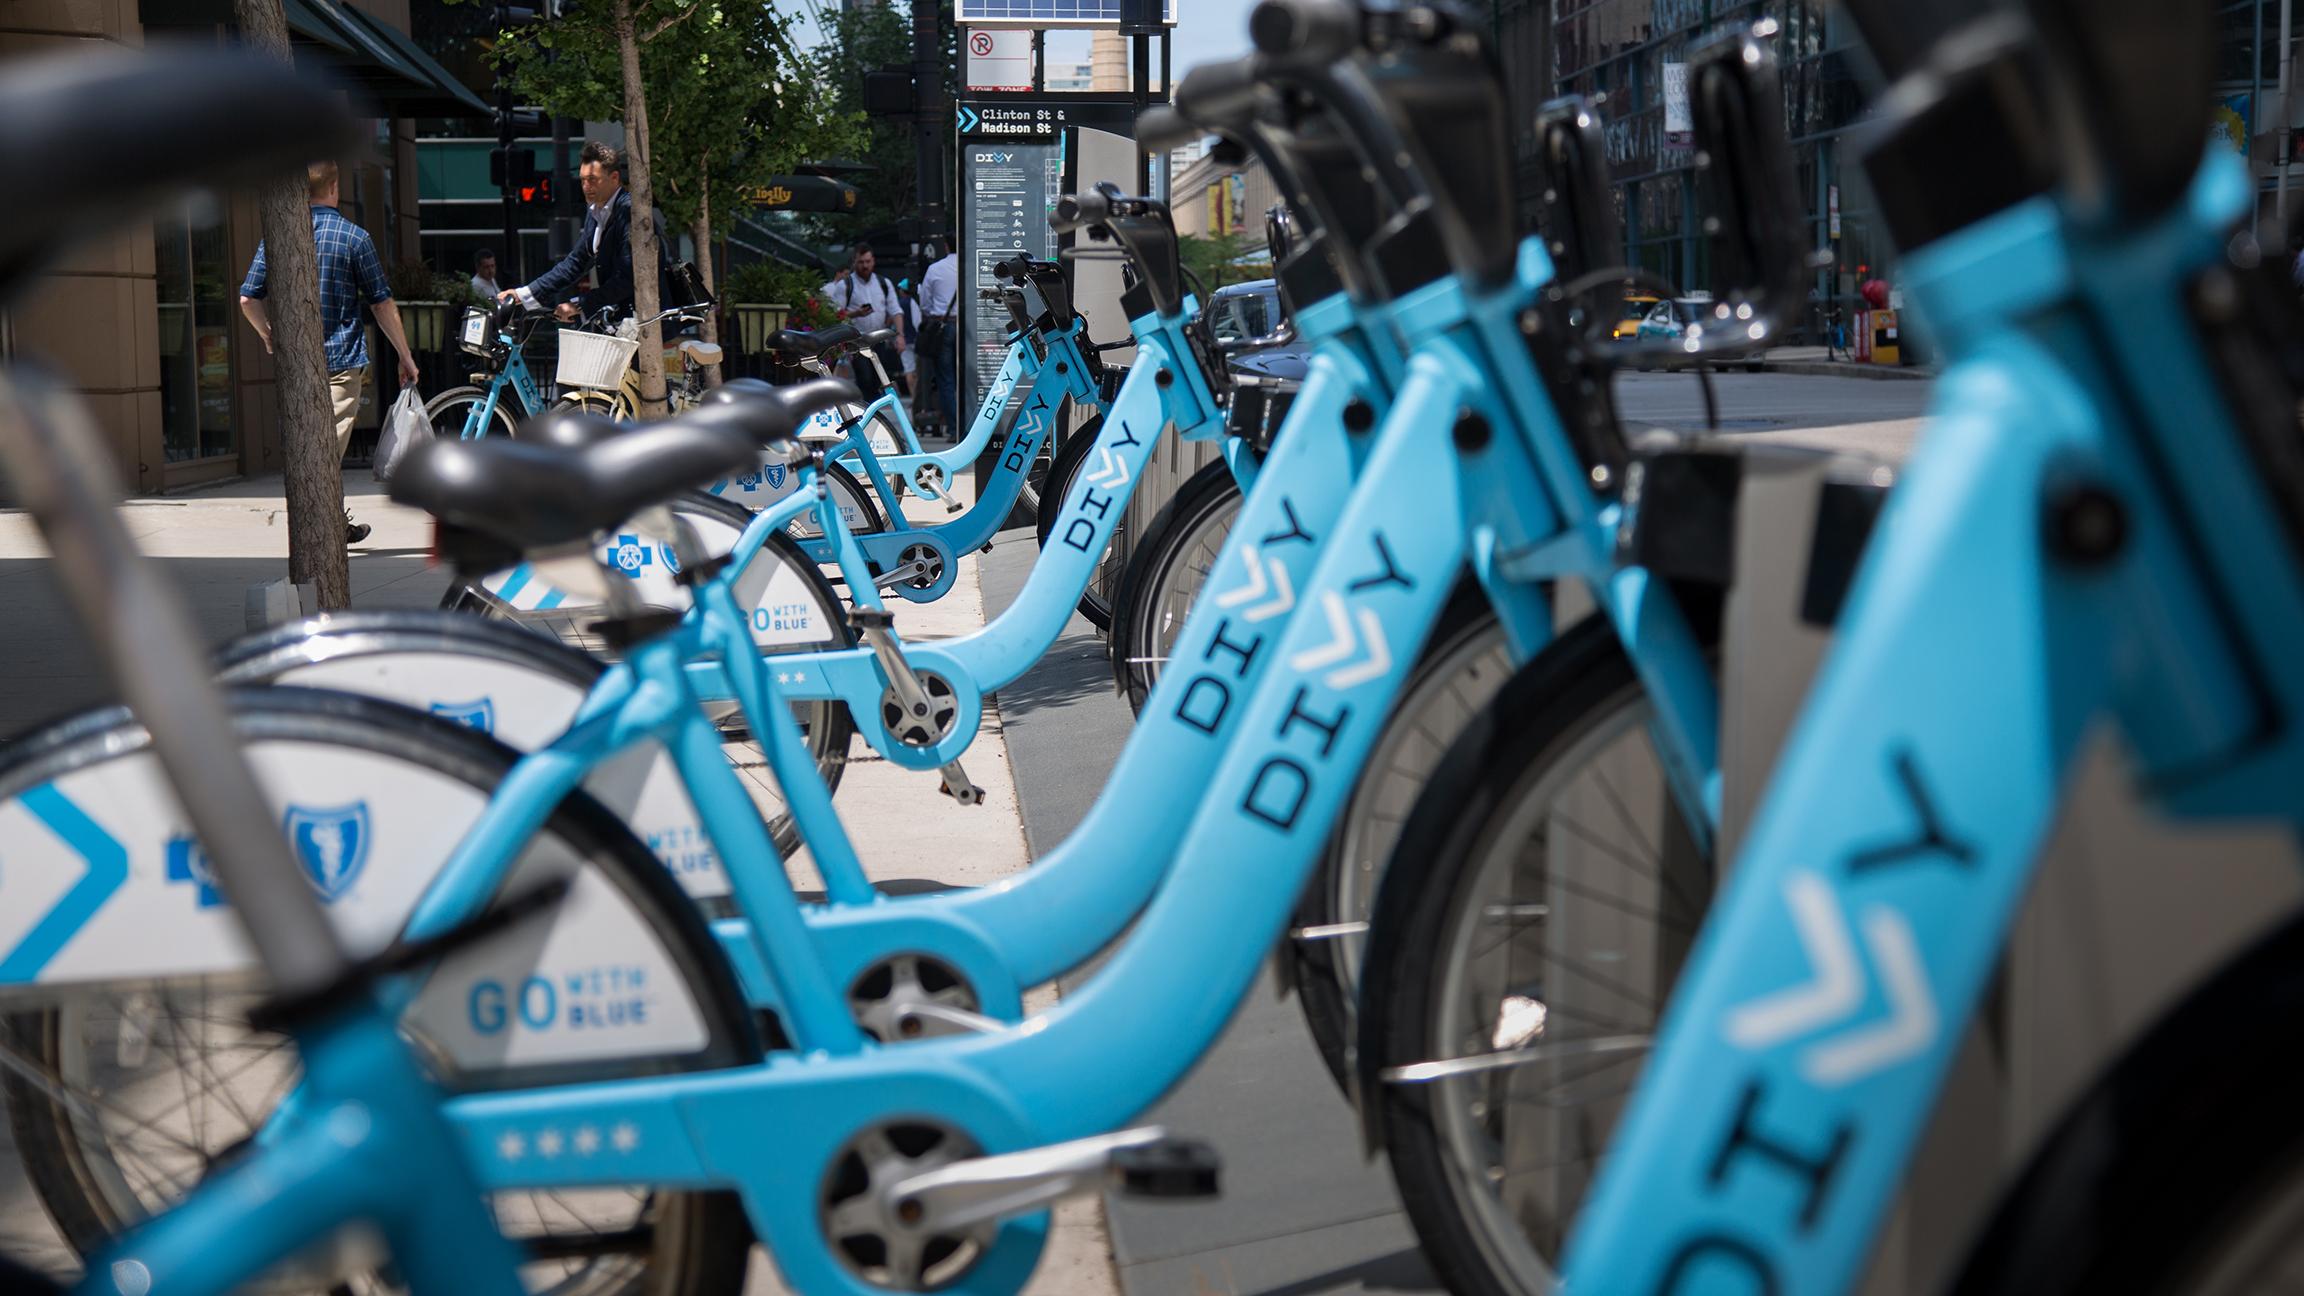 Divvy riders may soon be able to use the Ventra app to pay for bike rentals, thanks to a grant from the Federal Transit Administration. (Tony Webster / Wikimedia Commons)